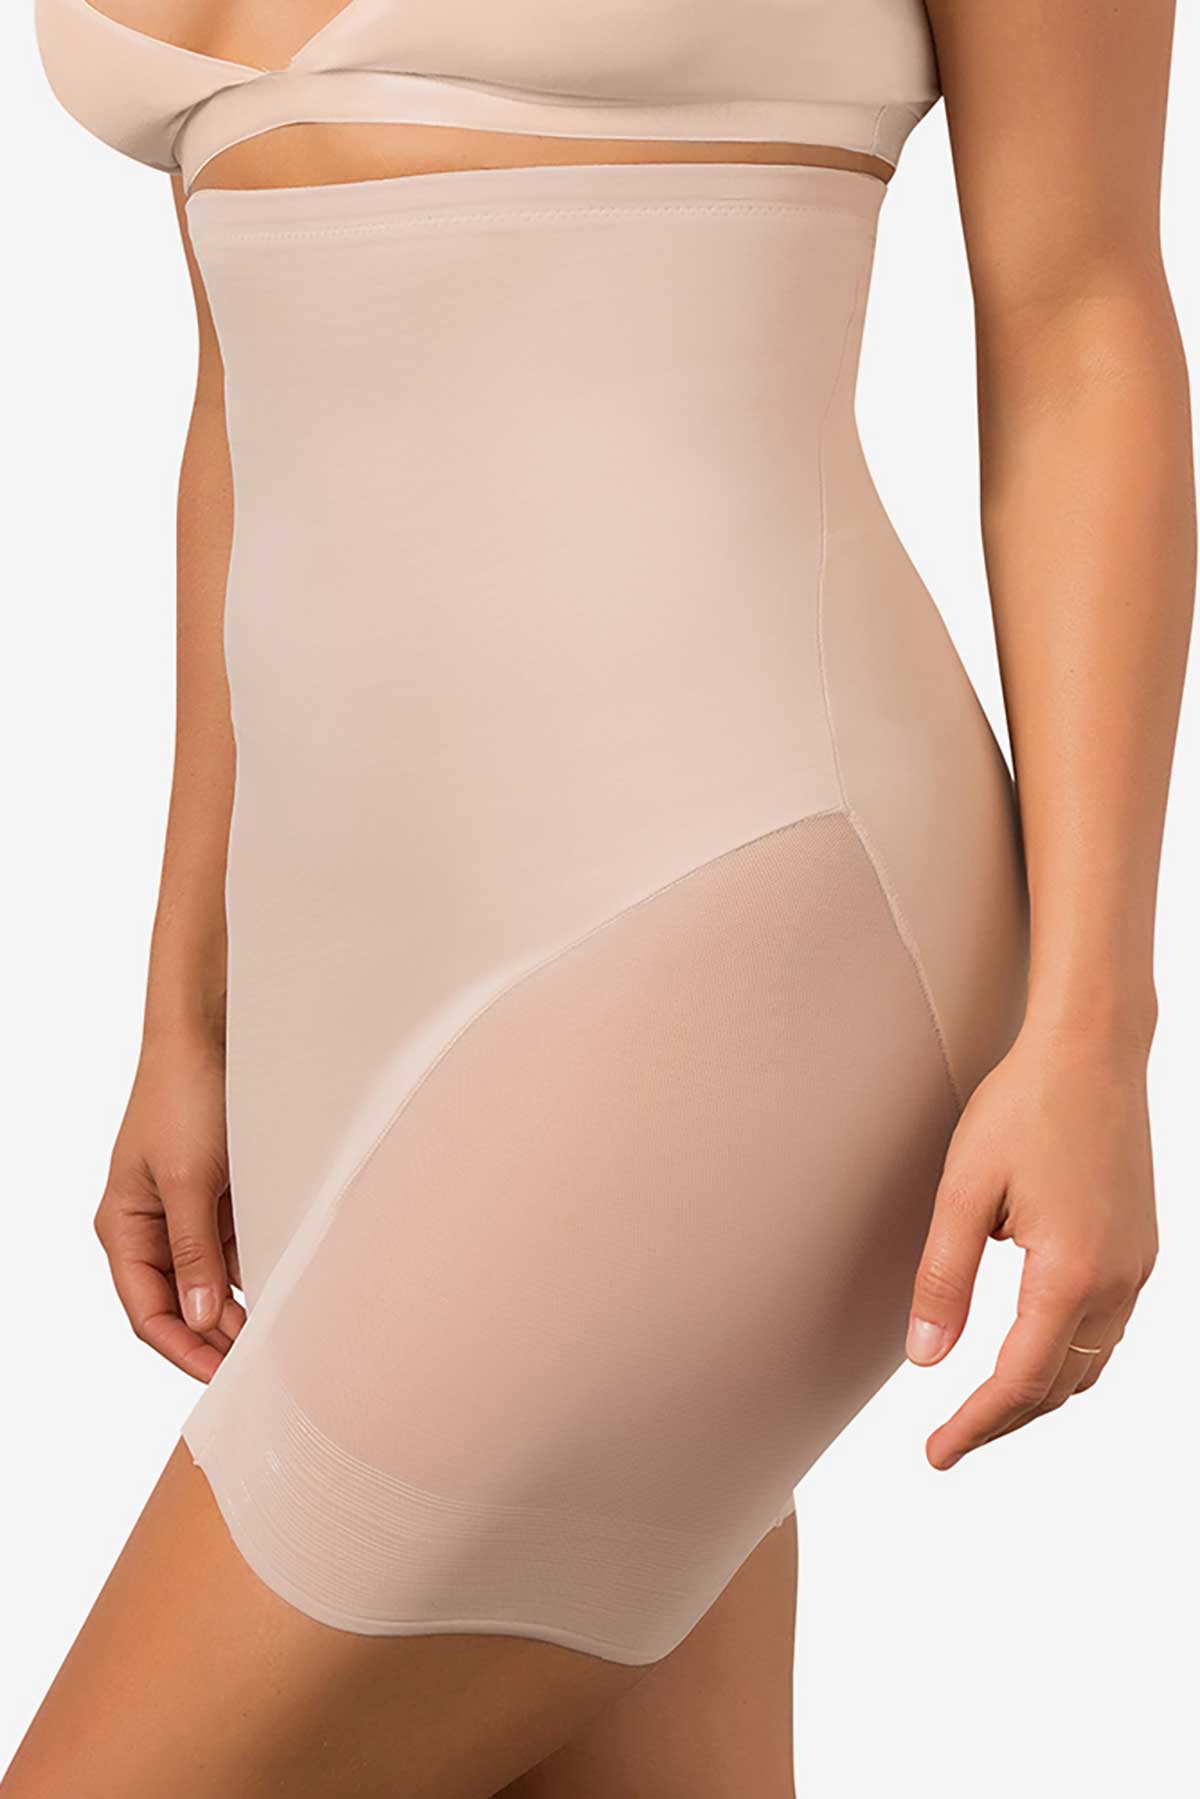 Miraclesuit Sexy Sheer Shaping High Waist Slip: Miraclesuit Slip